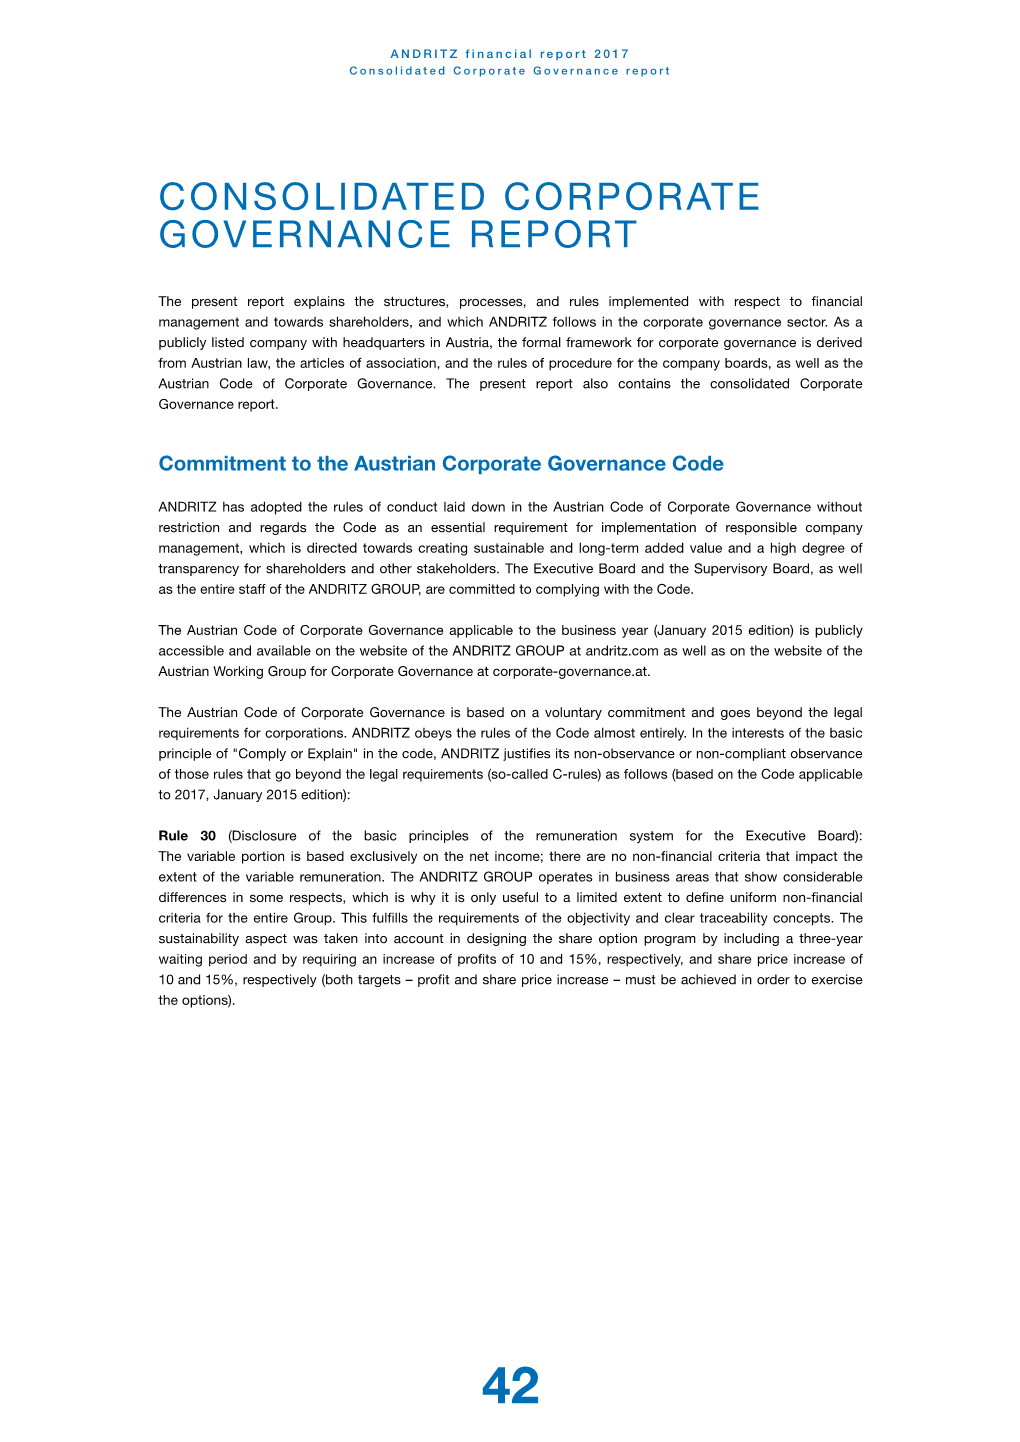 ANDRITZ Corporate Governace Report 2017